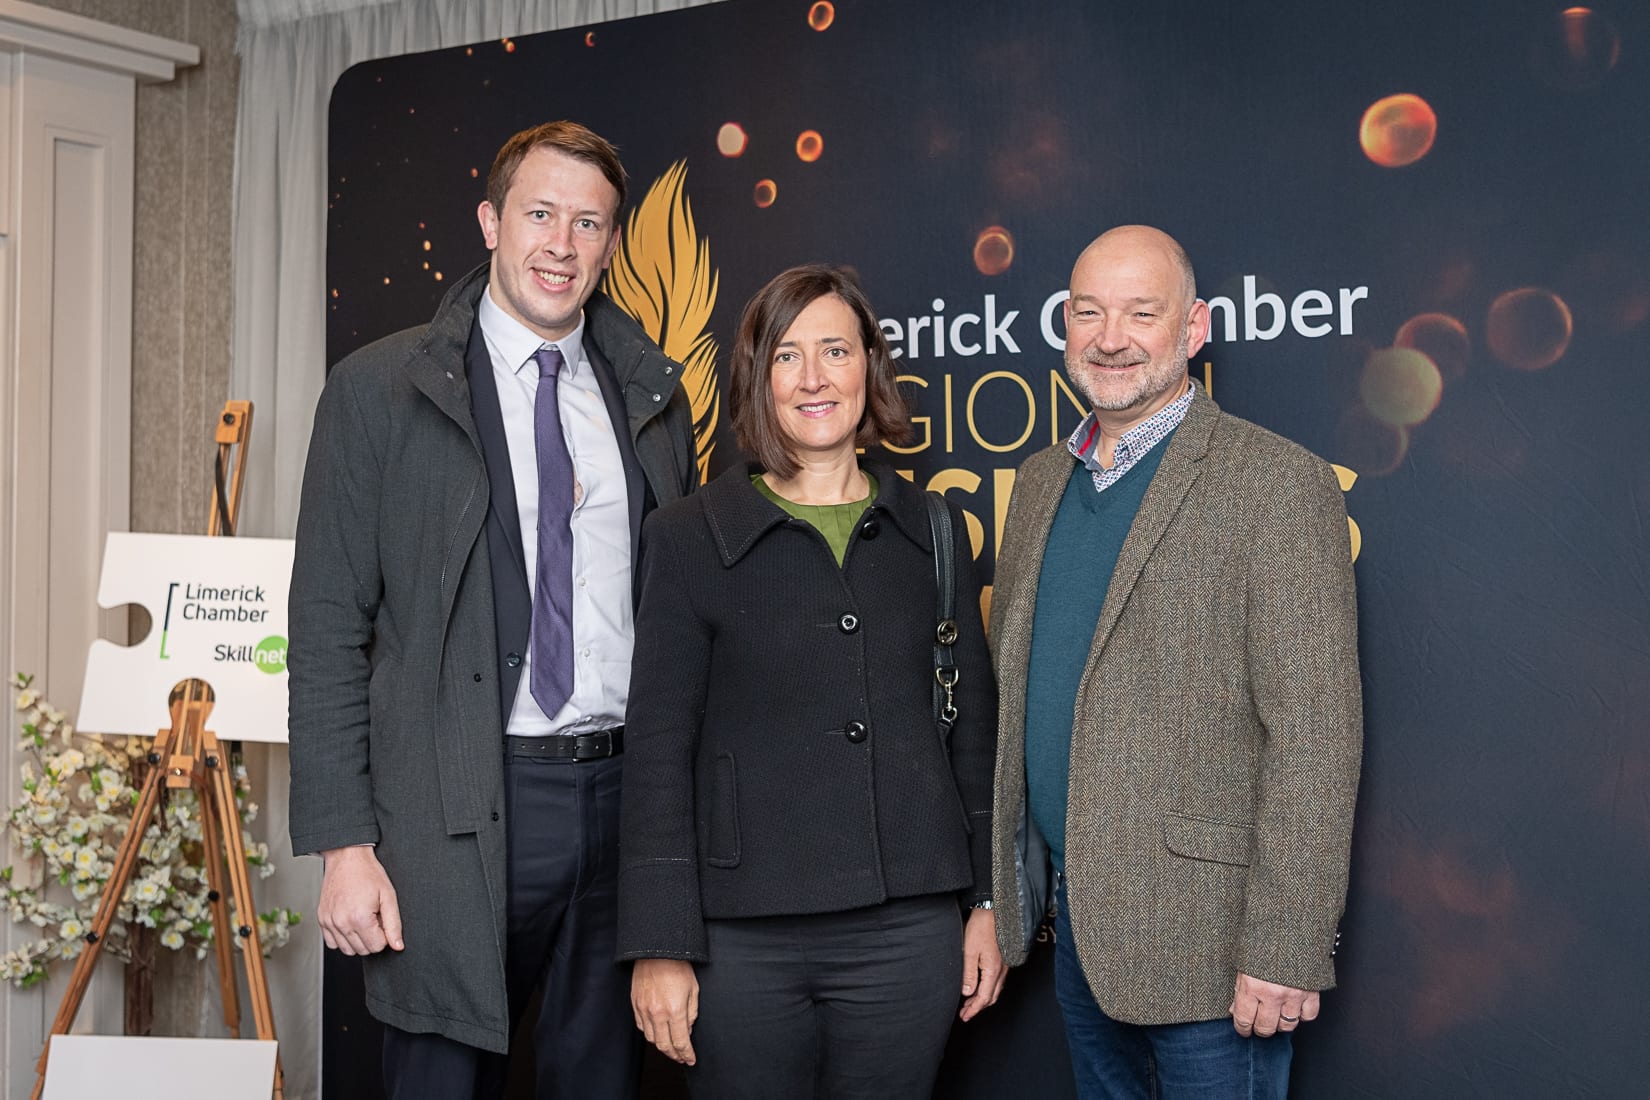 No repro fee-Limerick Chamber President Dinner Shortlist announcement which was held in The Limerick Strand Hotel on Wednesday 16th October  - From Left to Right: Ed Kelly - HOMS, Ann Lyons and Paul Gadie - Gift Innovations.
Photo credit Shauna Kennedy